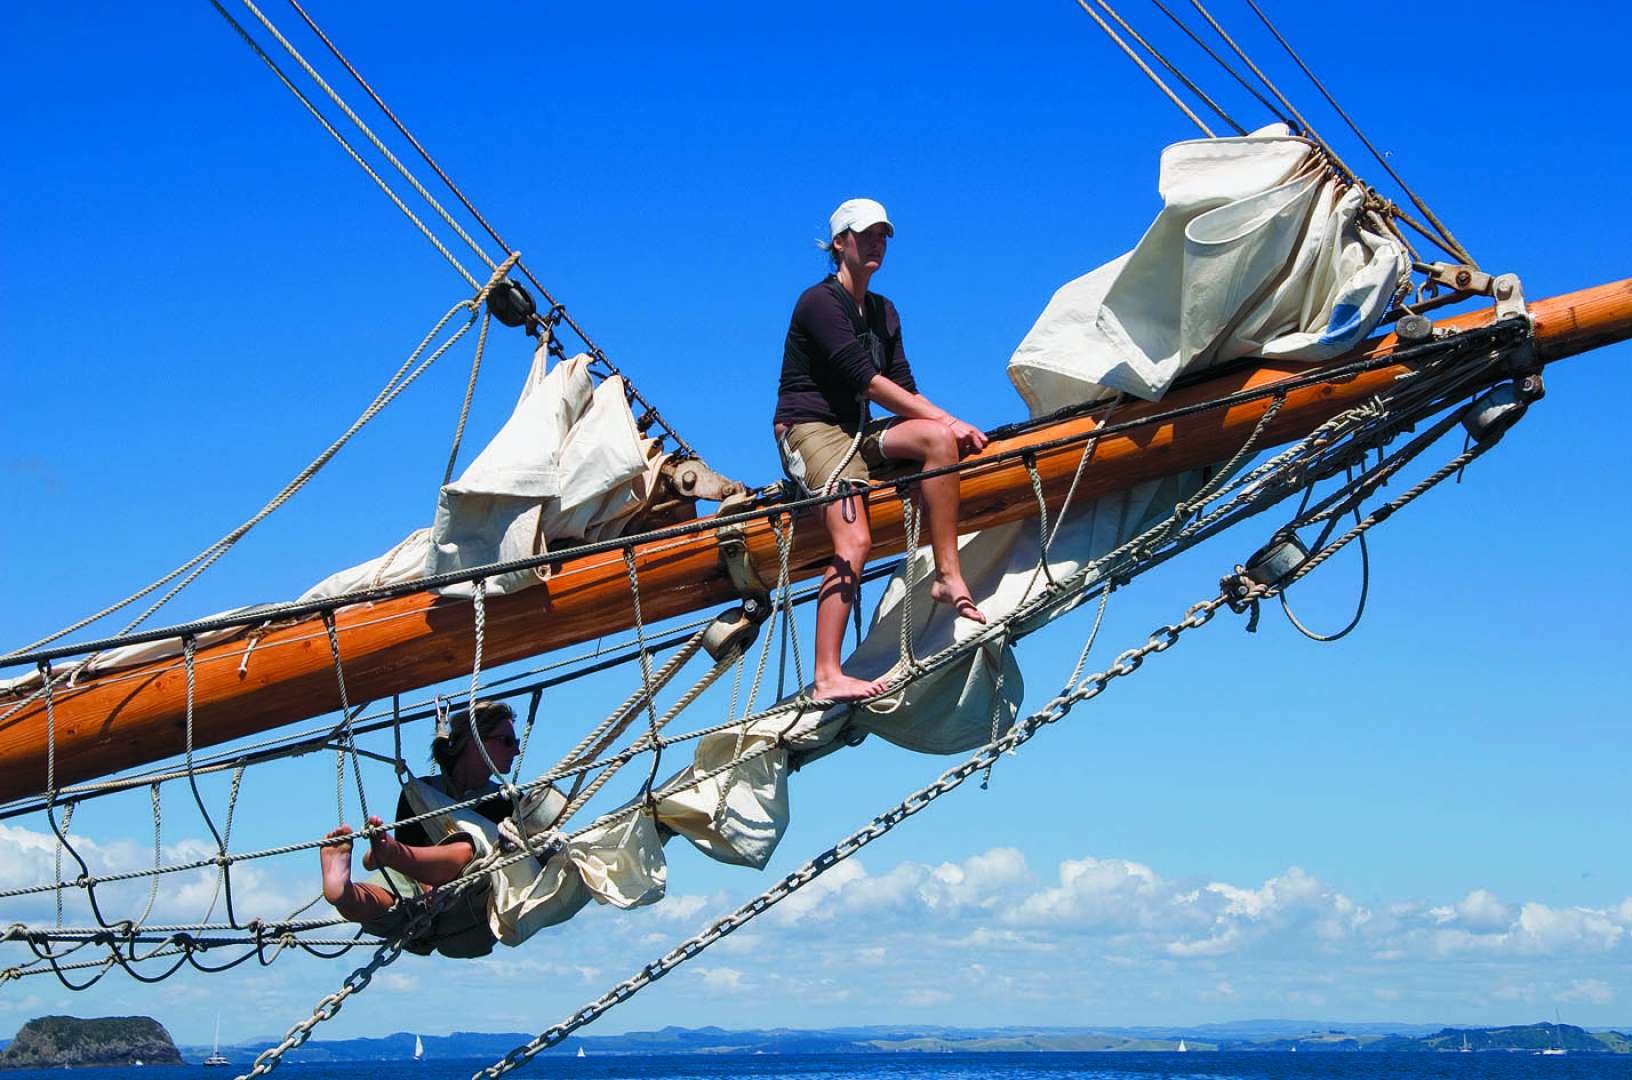 Riding the Bowsprit activity with R Tucker Thompson